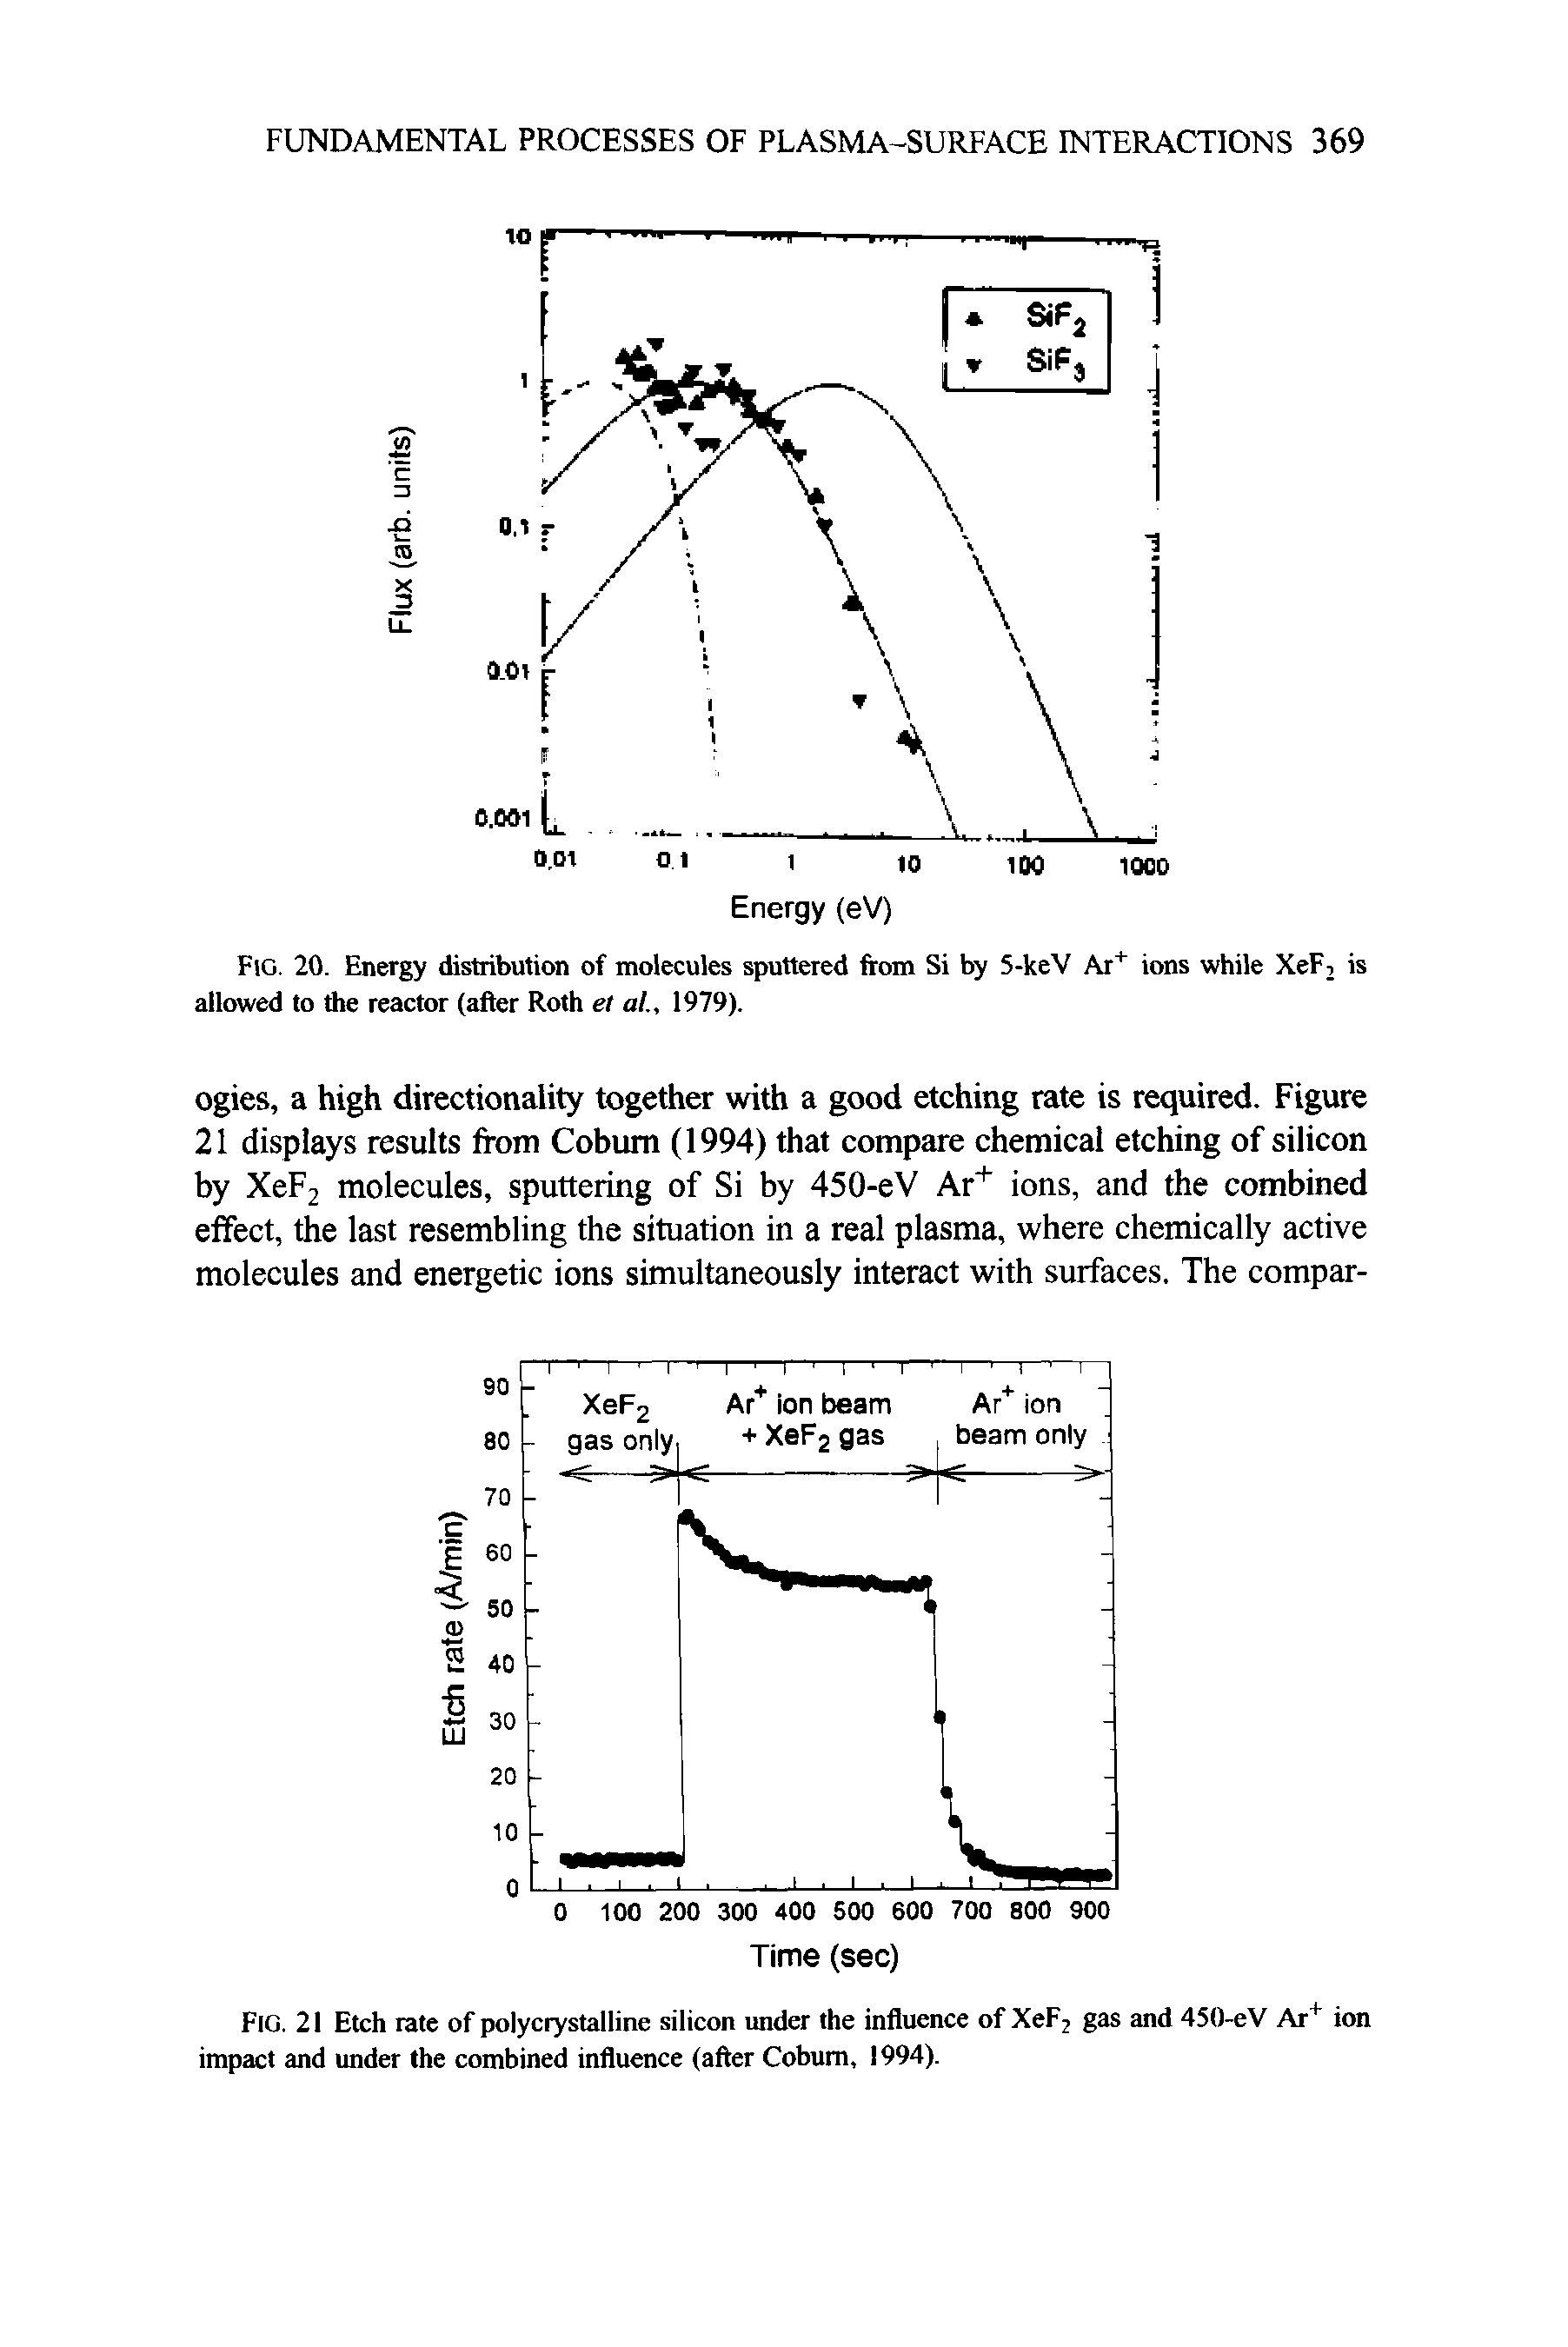 Fig. 21 Etch rale of polycrystalline silicon under the influence of XeF2 gas and 450-eV Ar ion impact and under the combined influence (after Cobum, 1994).